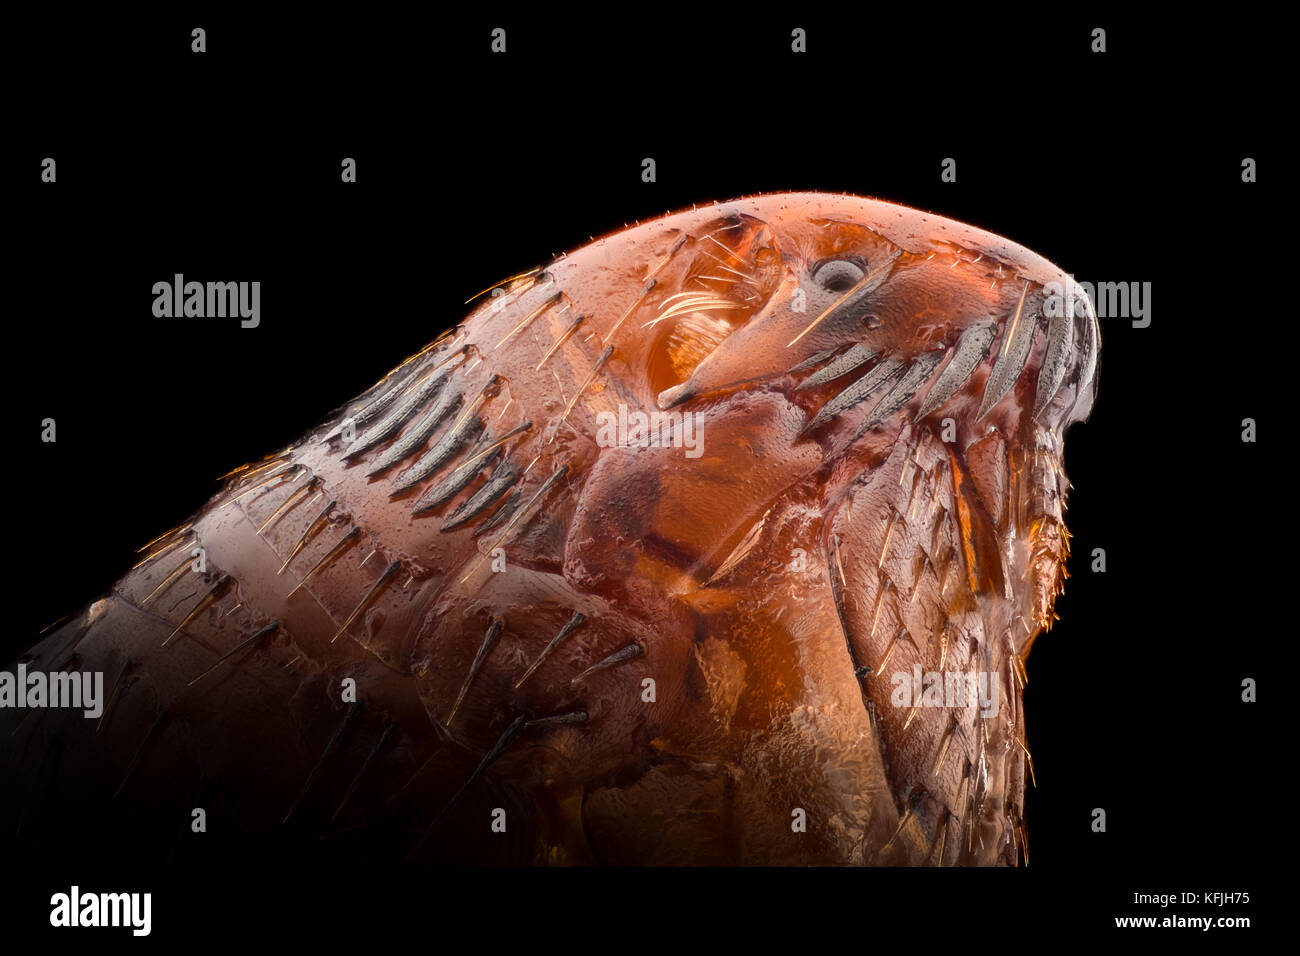 Extreme magnification - Flea under the microscope Stock Photo